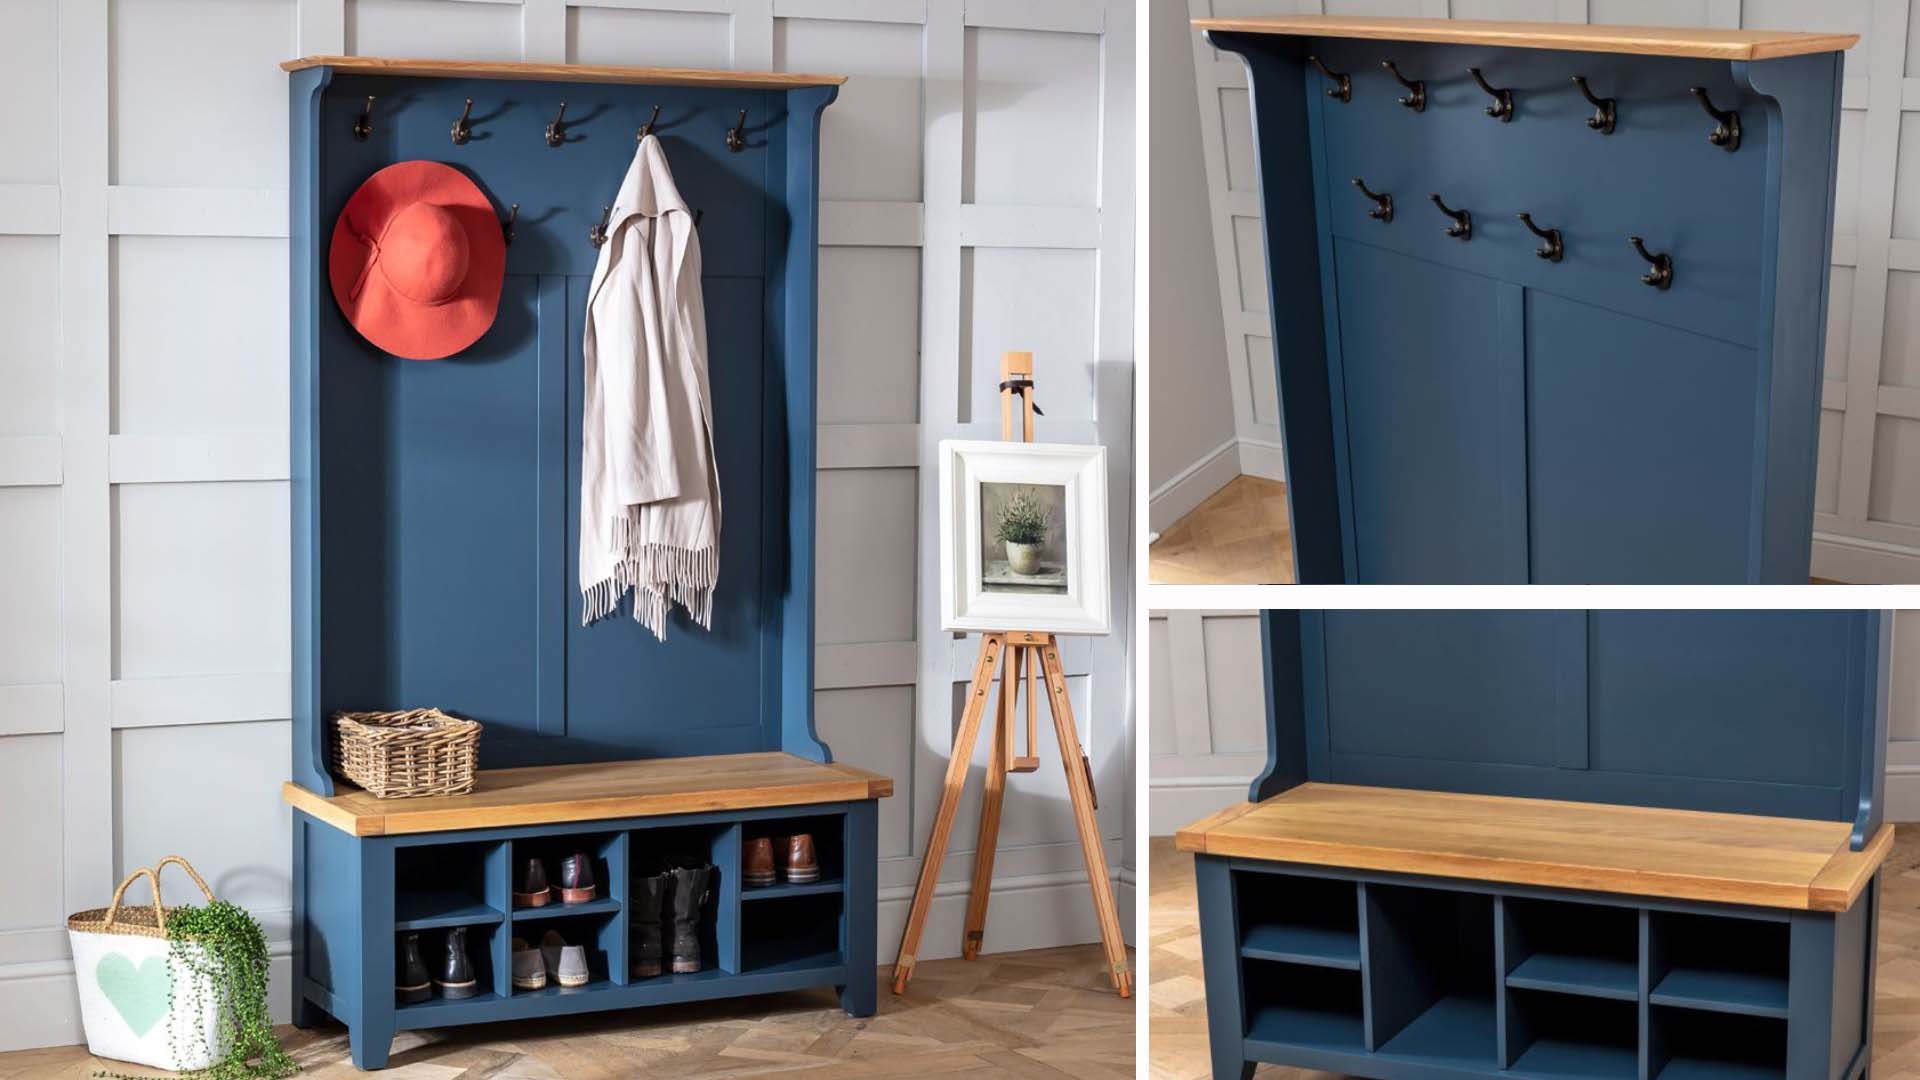 A hall area with a shoe bench and hooks for coats and hats